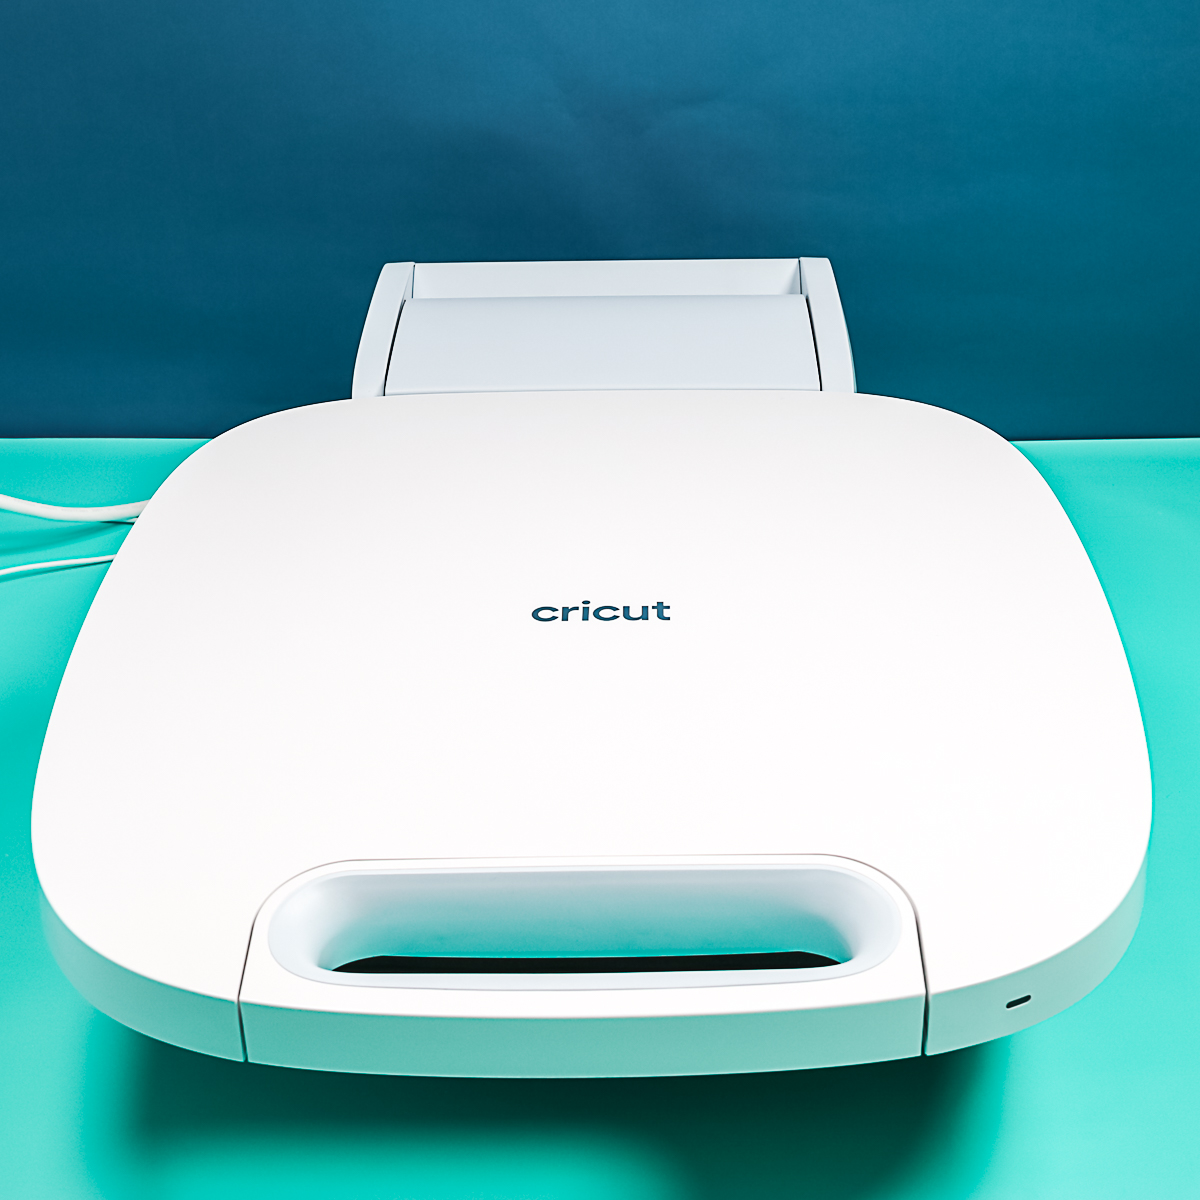 How to Use the Cricut AutoPress